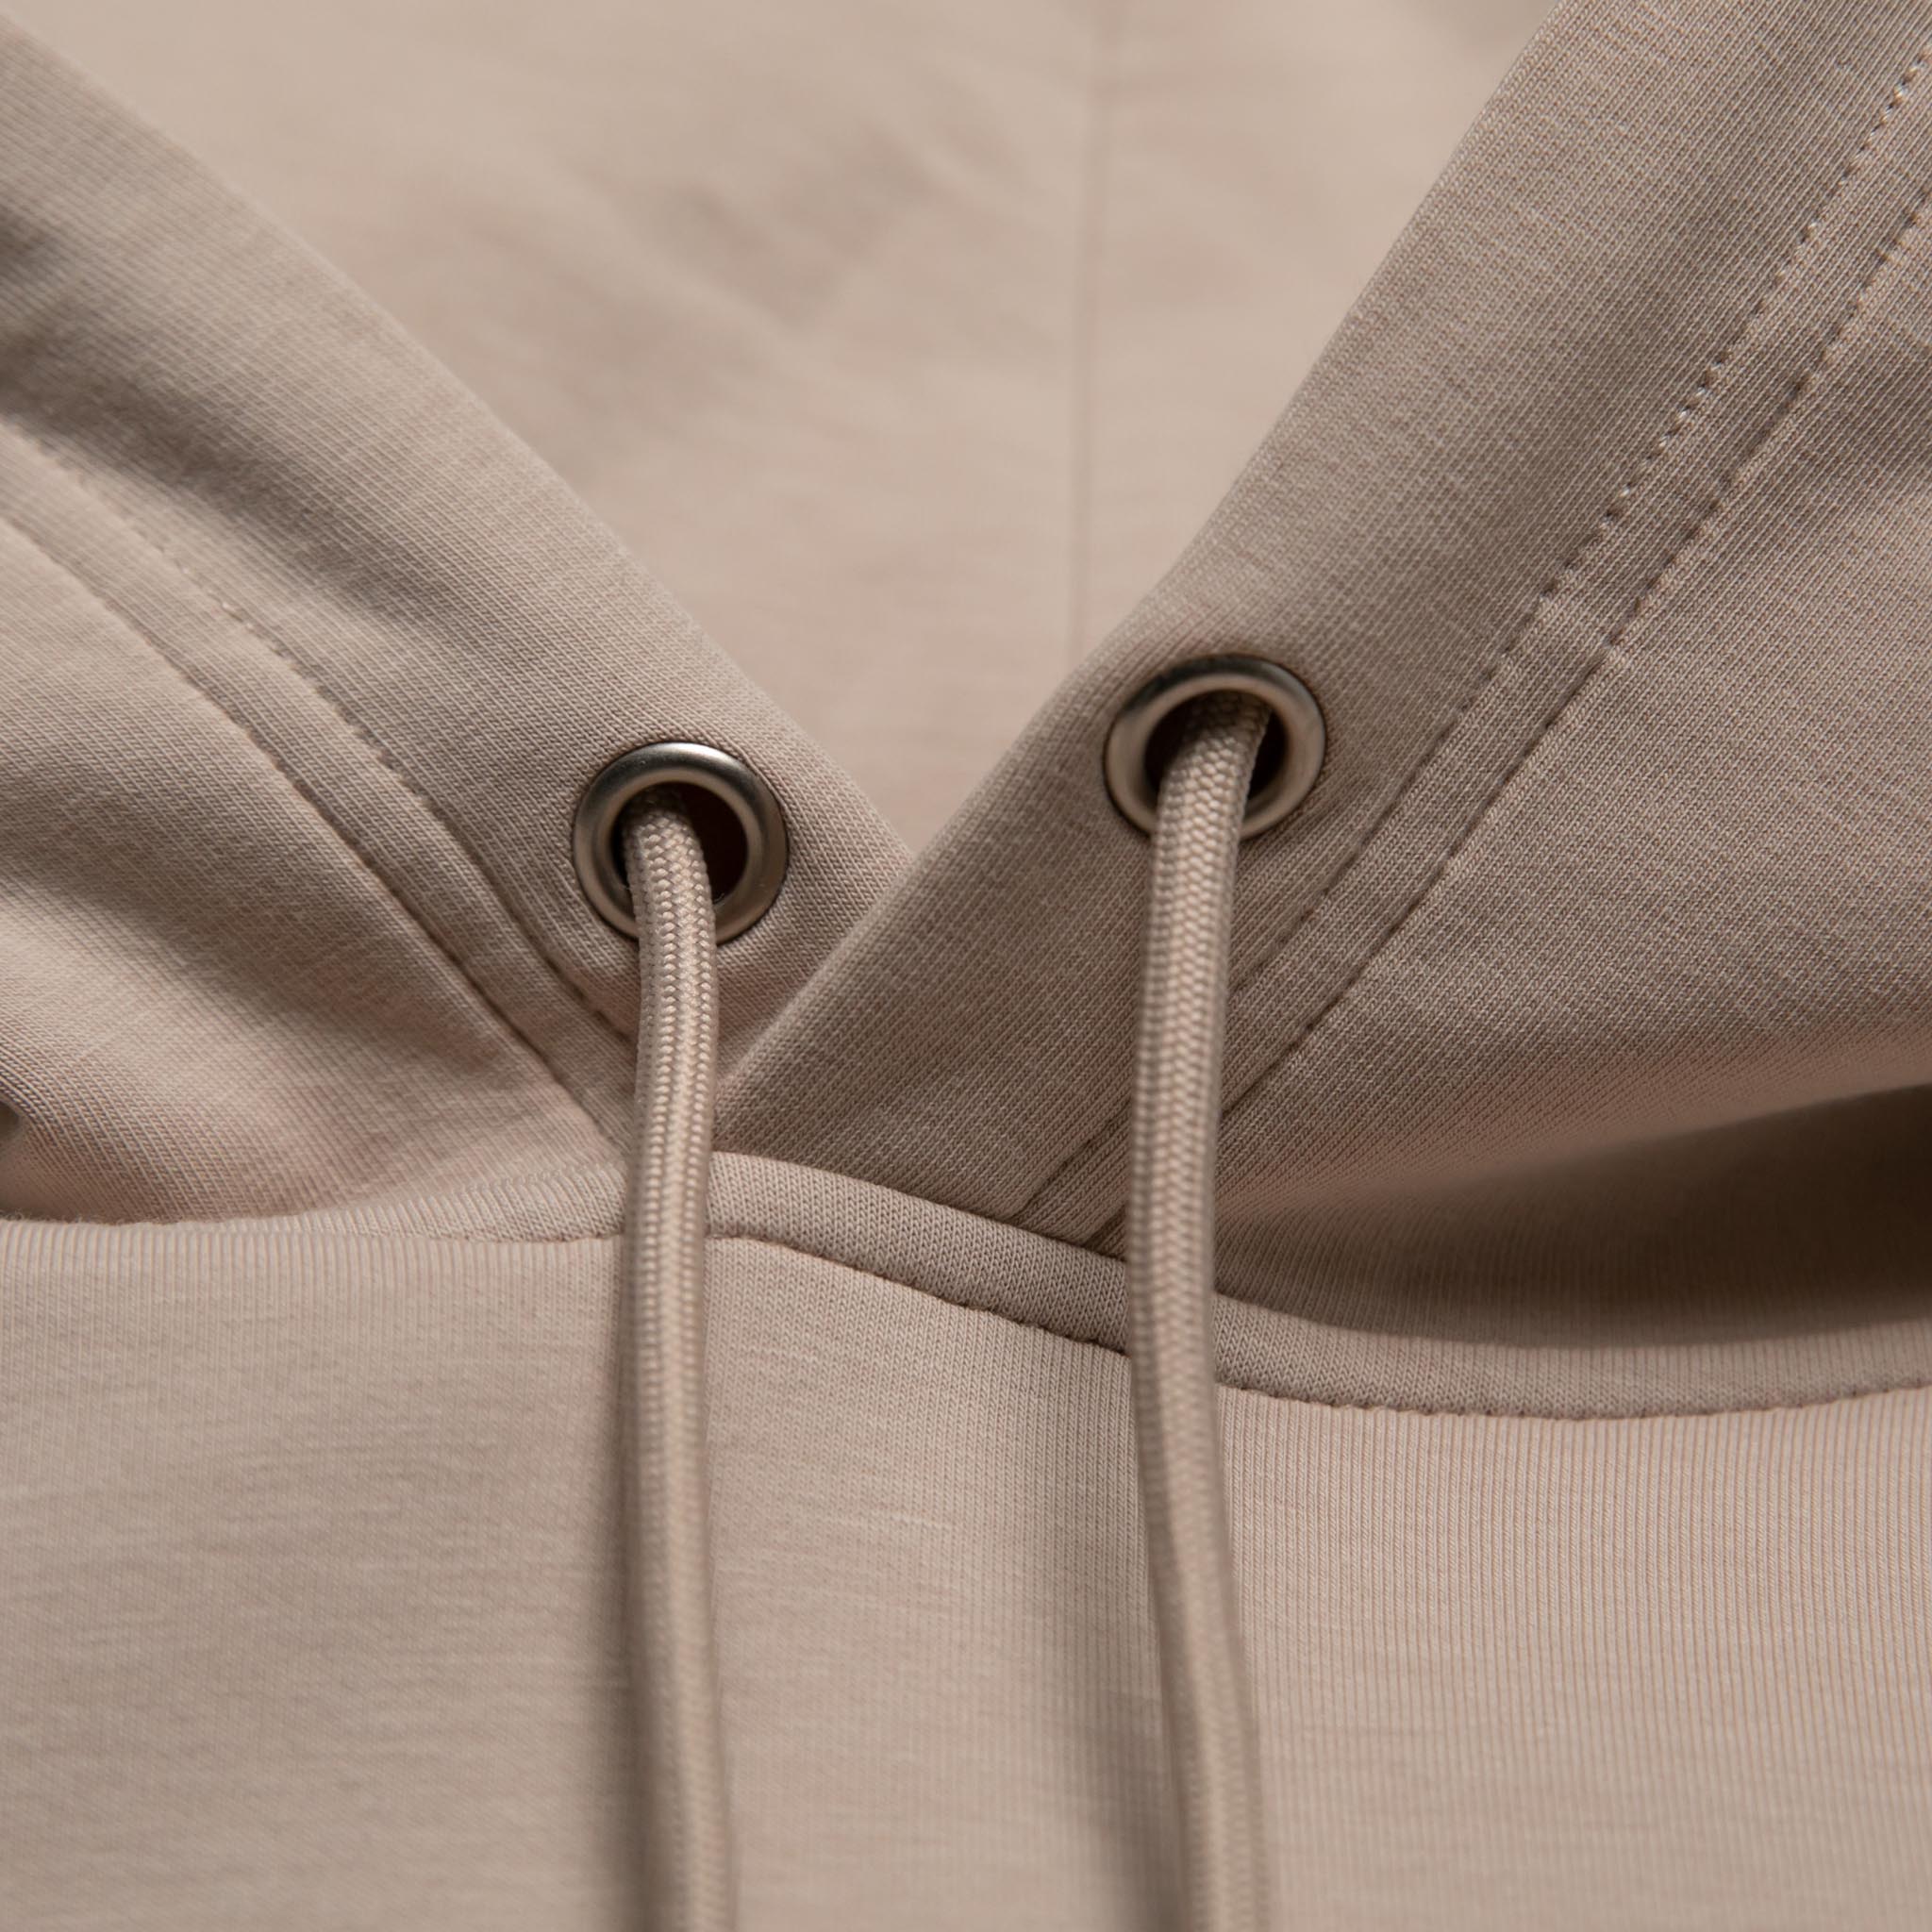 HOMME+ Essentials Hoodie Light Taupe